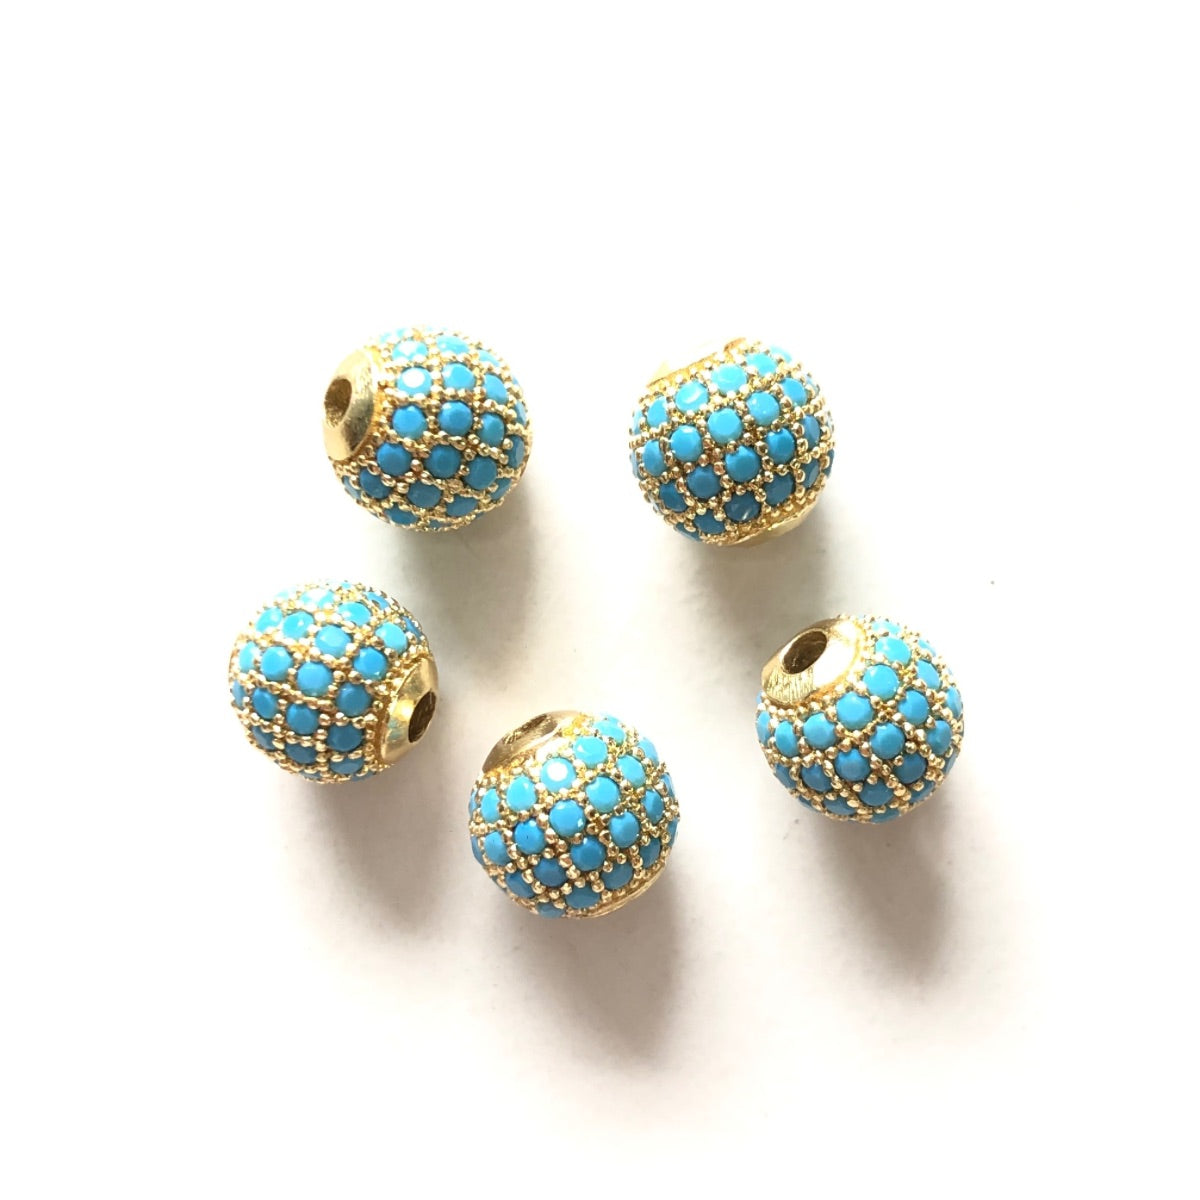 10pcs/lot 6mm, 8mm Colorful CZ Paved Ball Spacers Gold Turquoise CZ Paved Spacers 6mm Beads 8mm Beads Ball Beads Colorful Zirconia New Spacers Arrivals Charms Beads Beyond